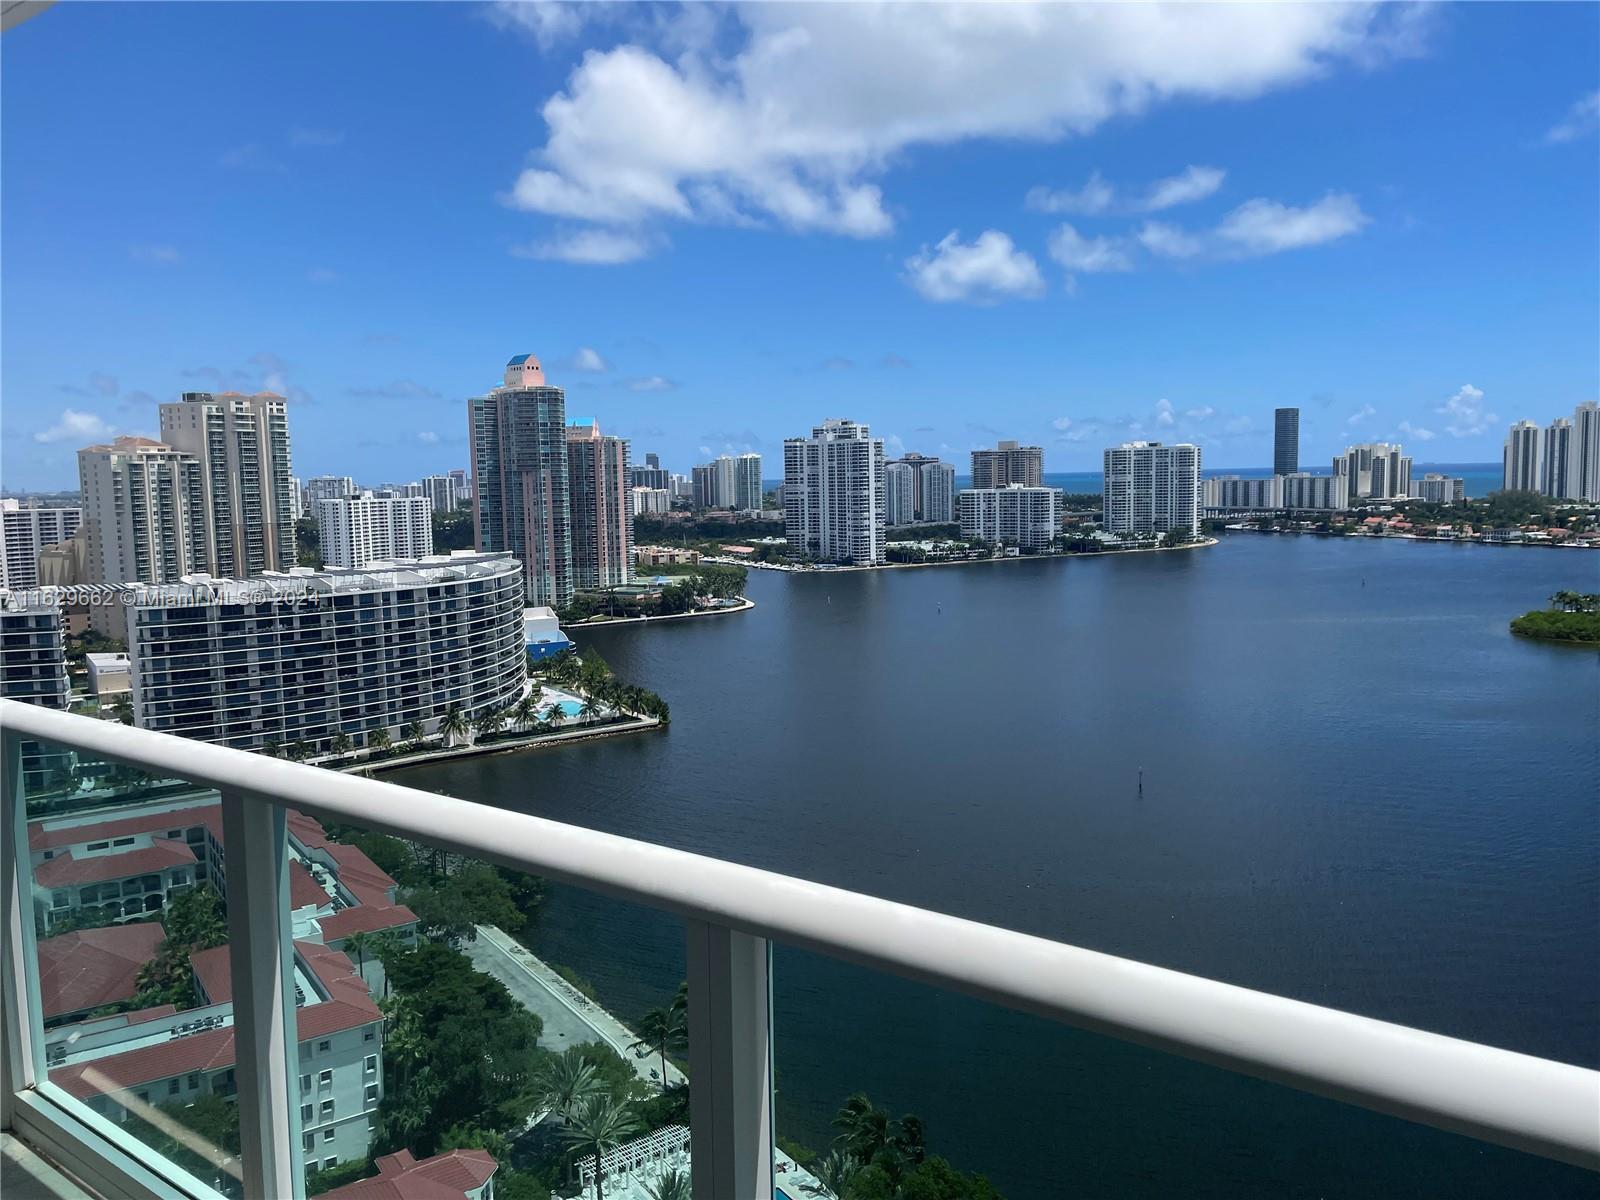 Endless water views from the 24th floor at the newly renovated Peninsula II, Luxury at its finest! Very spacious with 3 bedrooms + DEN & 3.5 baths, over 3,000 sq ft of bliss! Two balconies with gorgeous views of the intracoastal & city. Marble floors throughout and completely decorated & equipped with all the furniture included in the sale**Big Utility room with full size washer & dryer and walk-in closets throughout. ** One large Storage unit + 2 deeded garage parking spaces included** Peninsula II is a full service building with 24 hr security, concierge & valet. State of the art amenities including spa, sauna, fitness center, children's playroom, Tennis courts, BBQ and 2 pools for your enjoyment. Live like you're on vacation every day of your life, schedule your tour today!